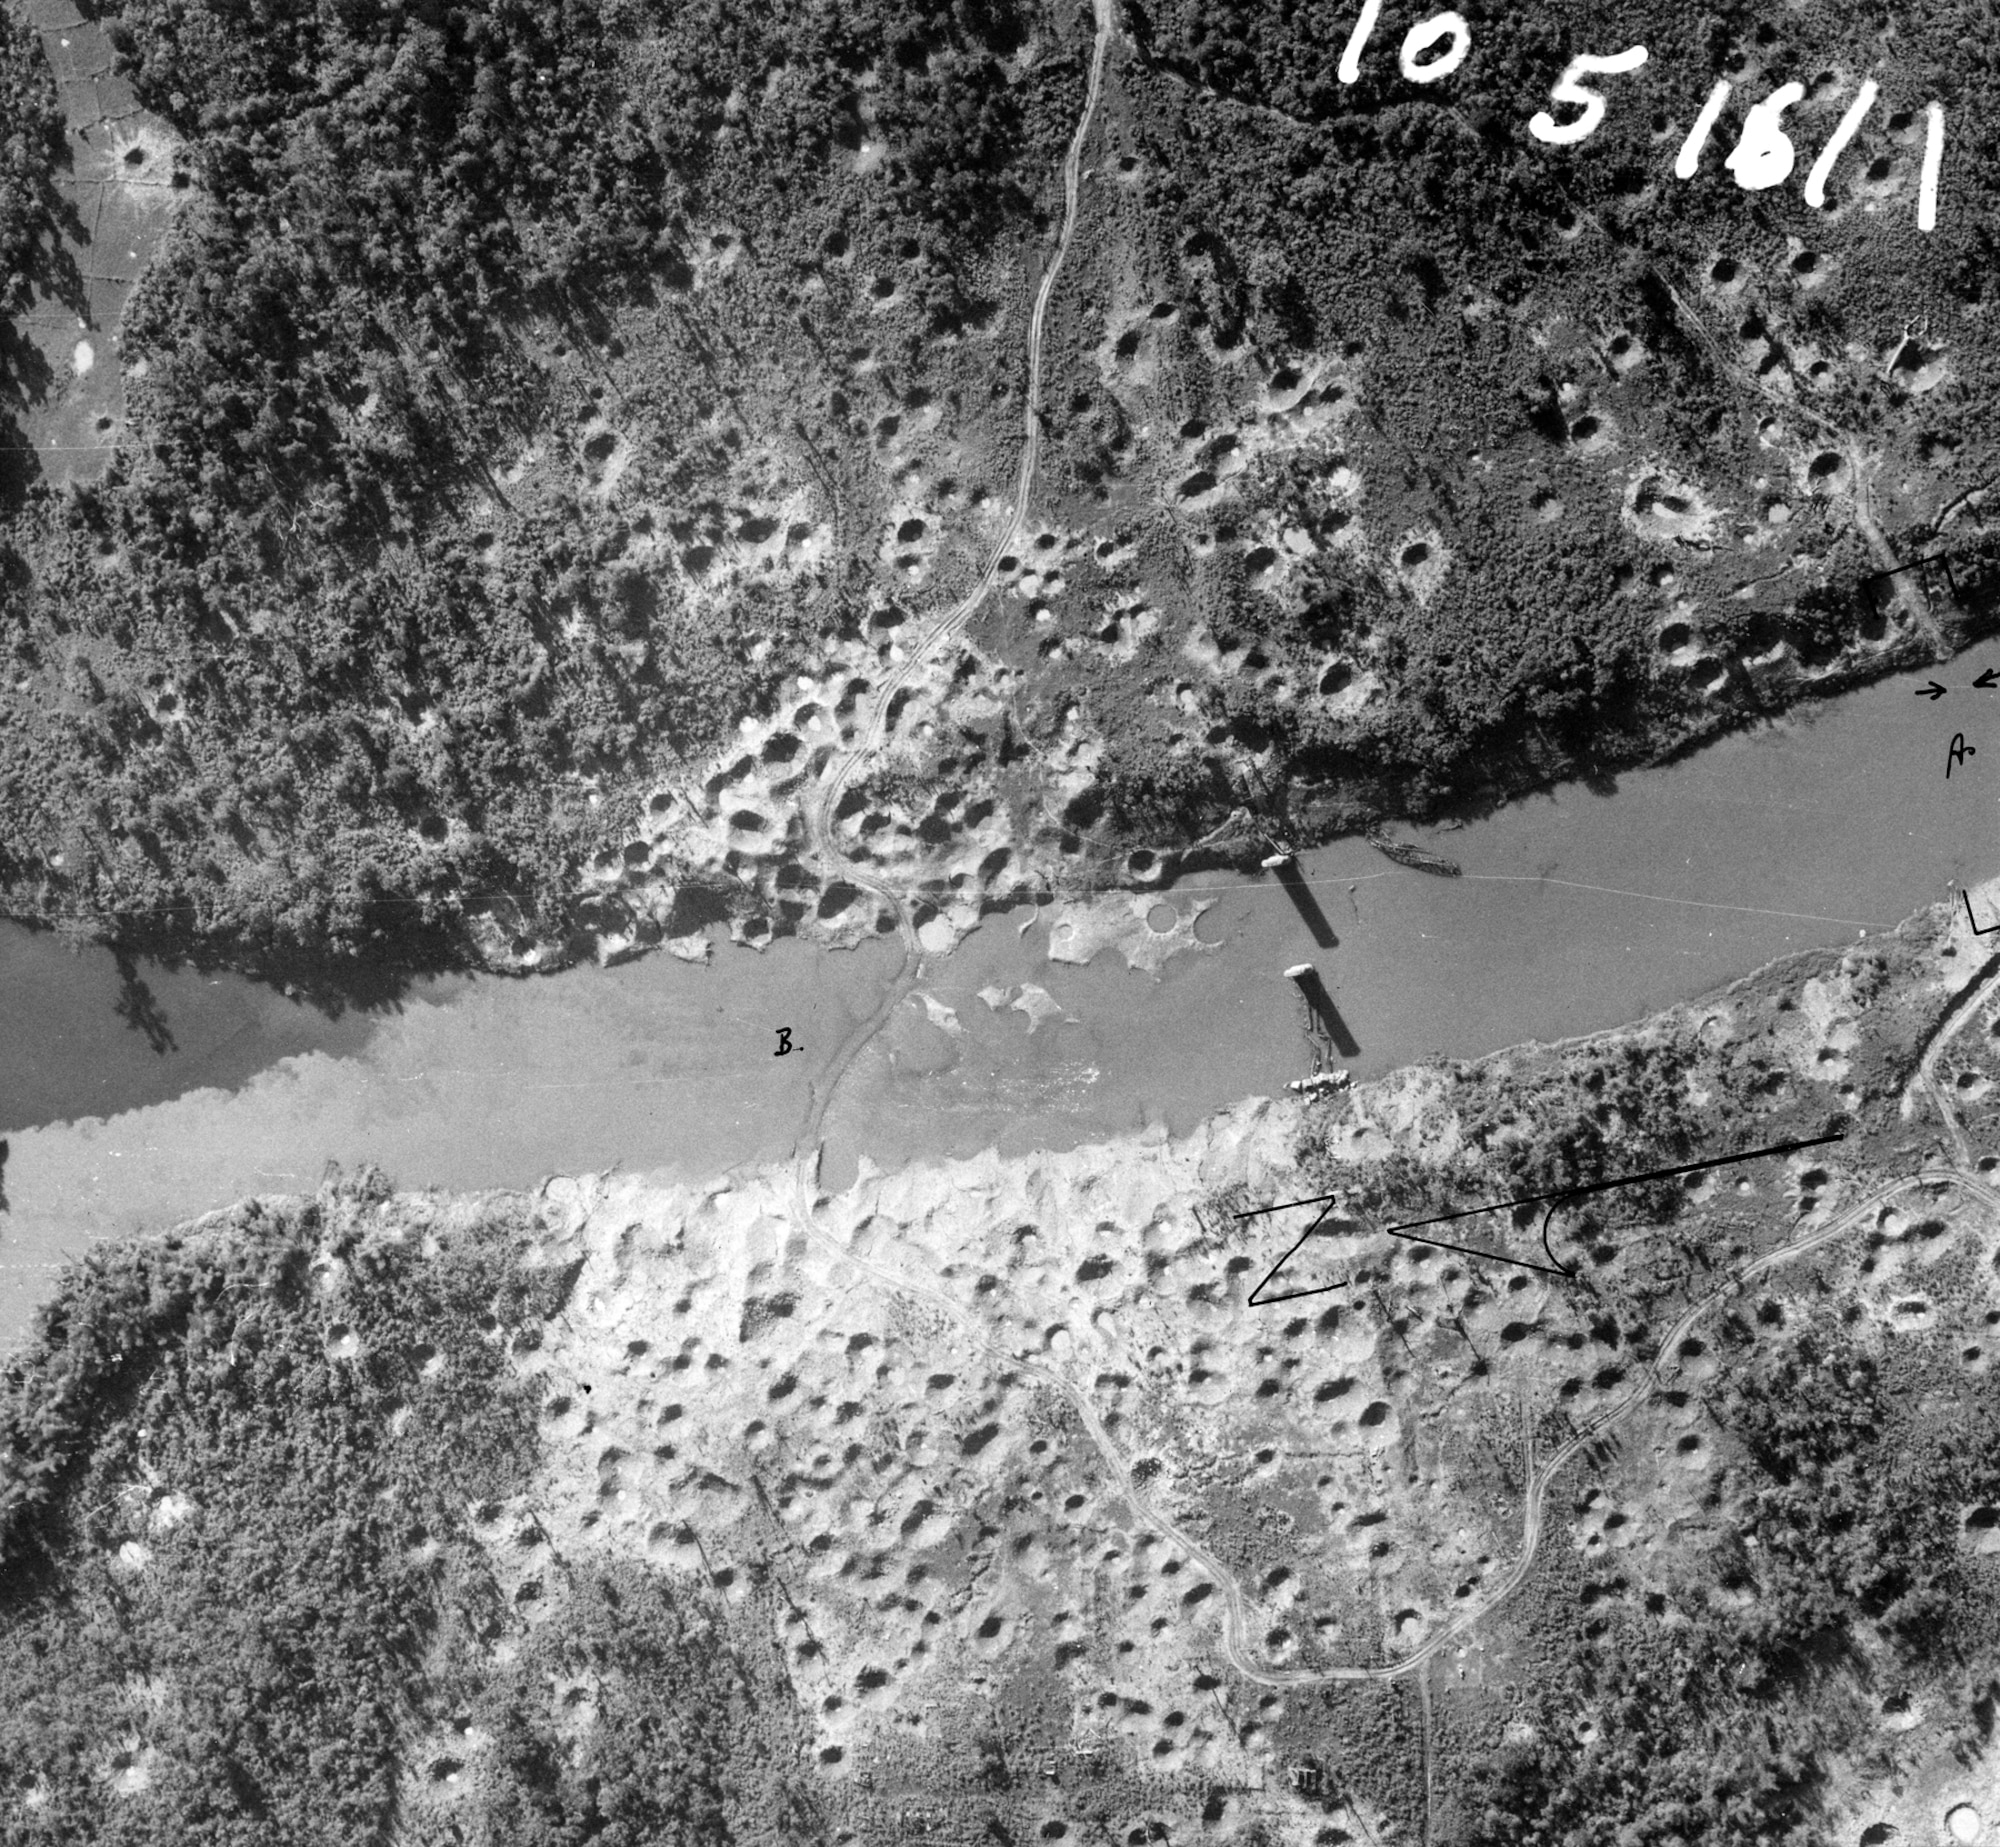 Destroyed bridge and shallow crossing, bombed repeatedly. The U.S. Air Force bombed key points on the Ho Chi Minh Trail. (U.S. Air Force photo).